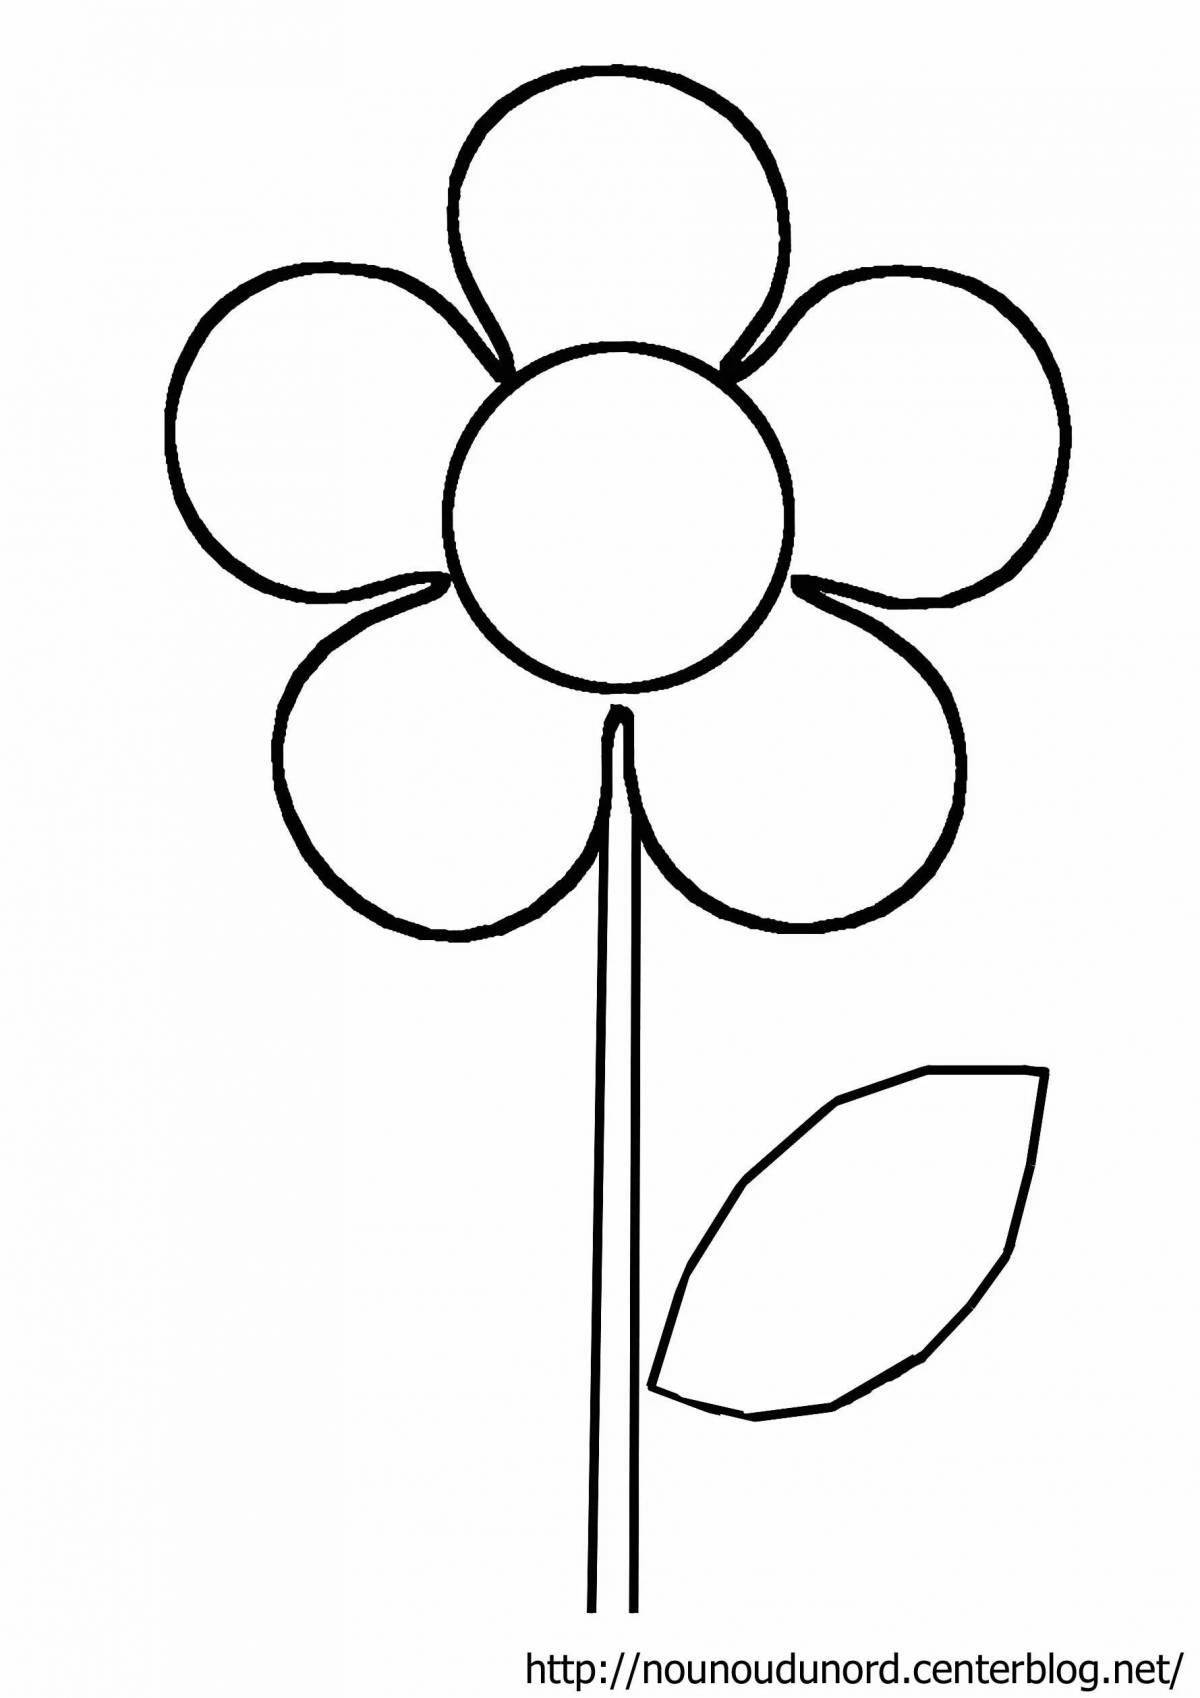 Coloring book with outstanding flower pattern